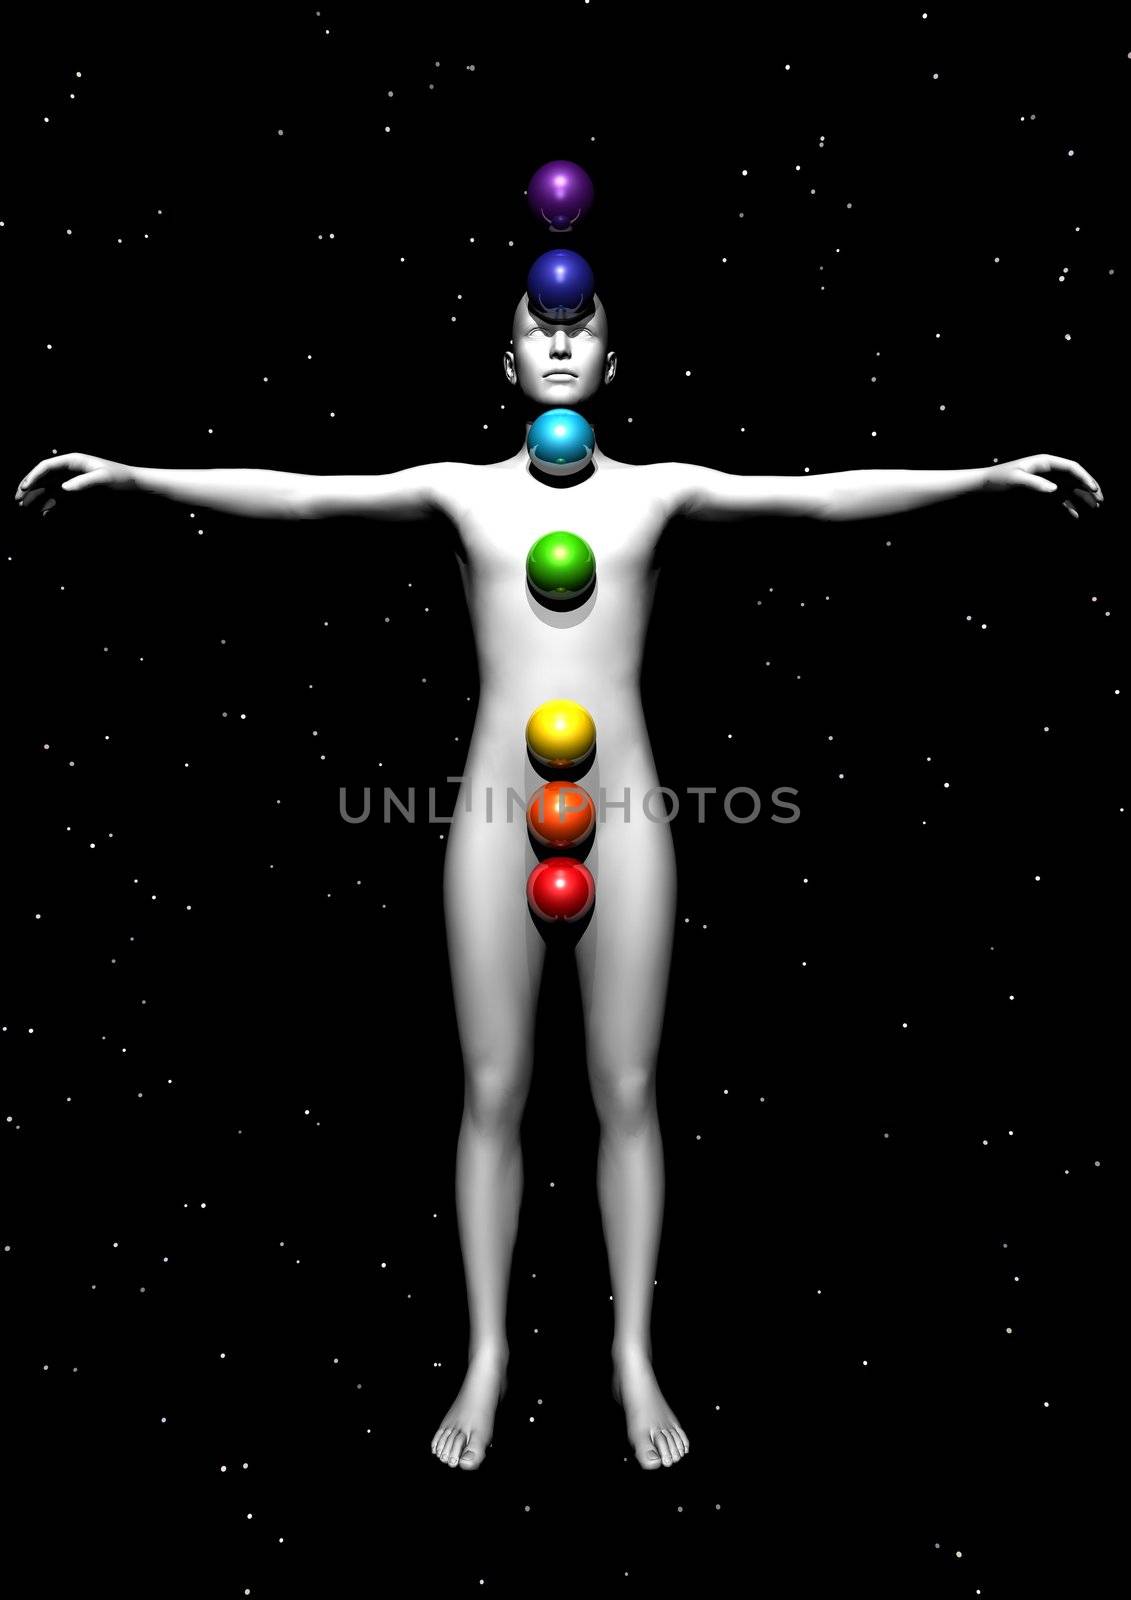 Human standing and balls with colors symbolizing chakras